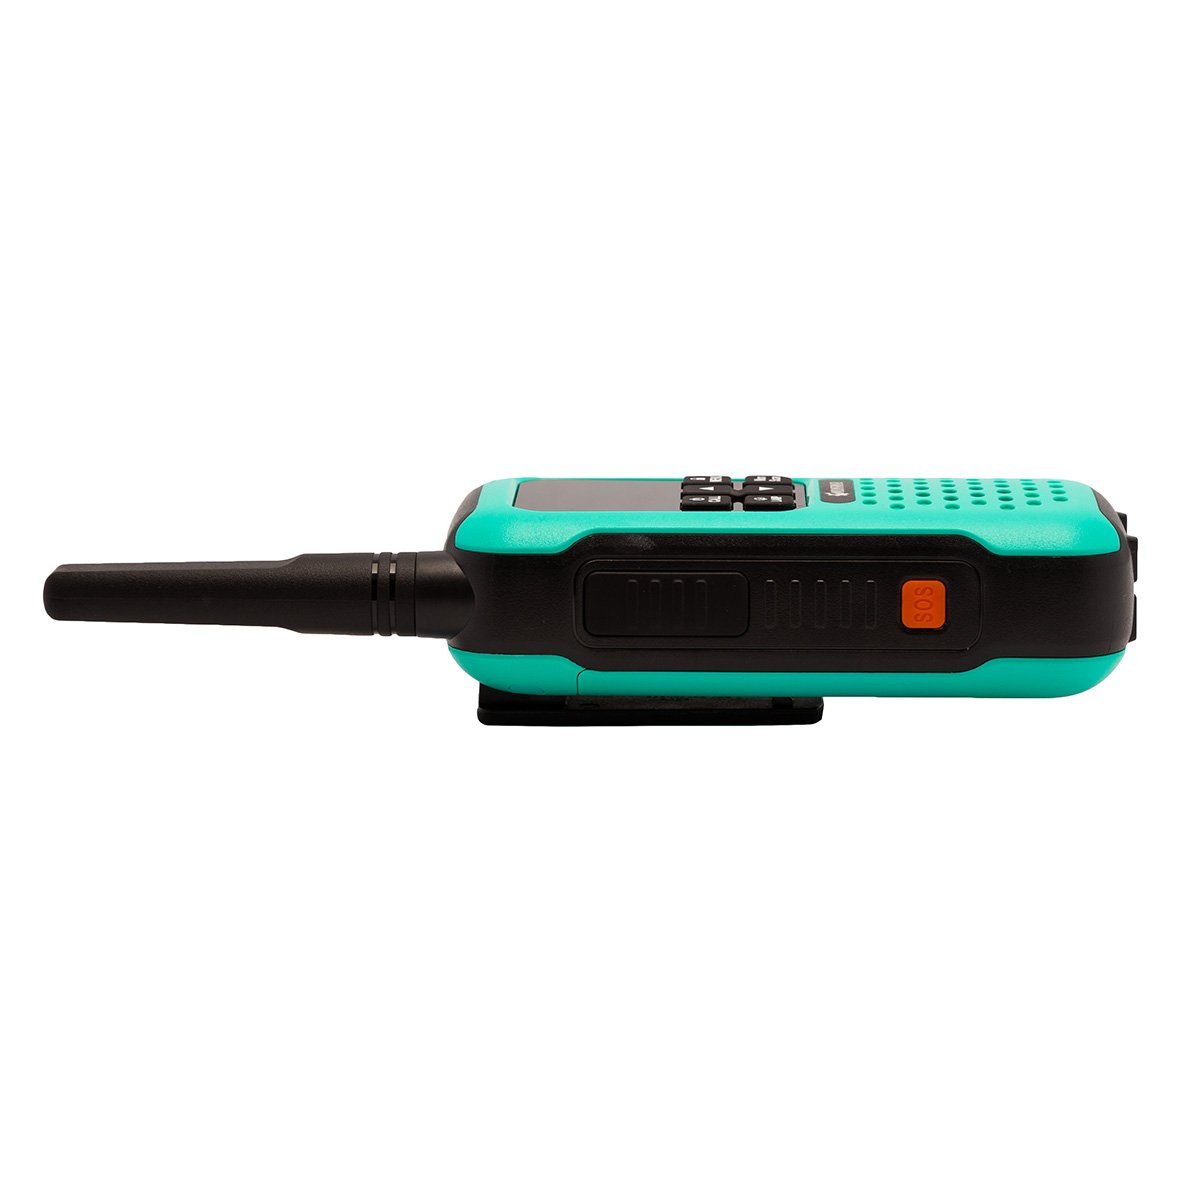 SCOUT 2W 2-Way Radio (Pair) - The Parts Lodge